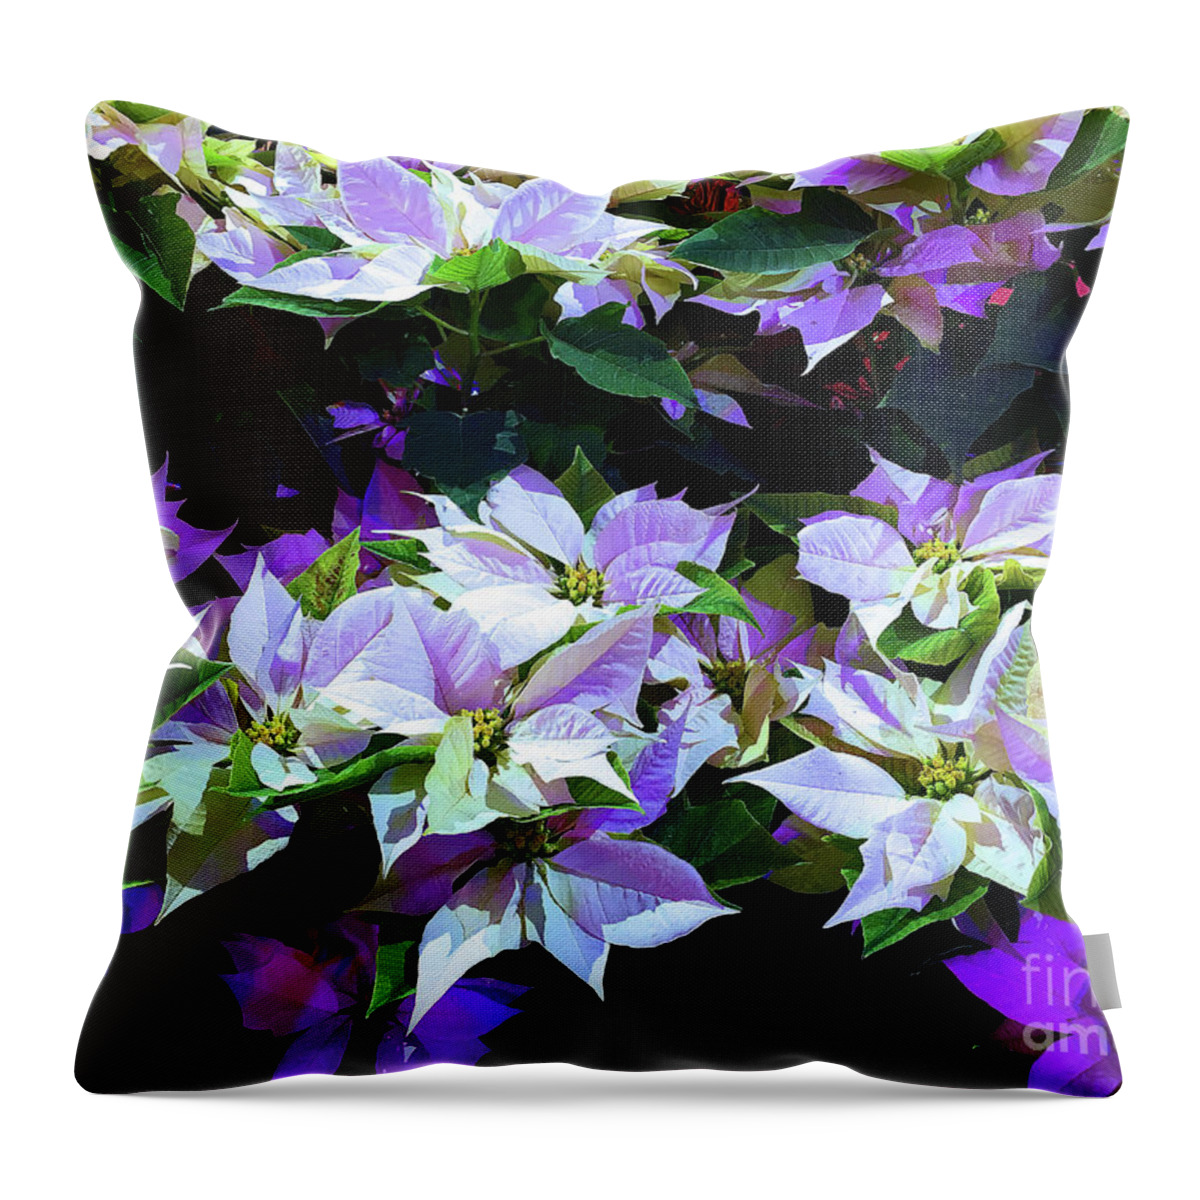 Flower Throw Pillow featuring the photograph Sanctuary Poinsettias by Eunice Warfel